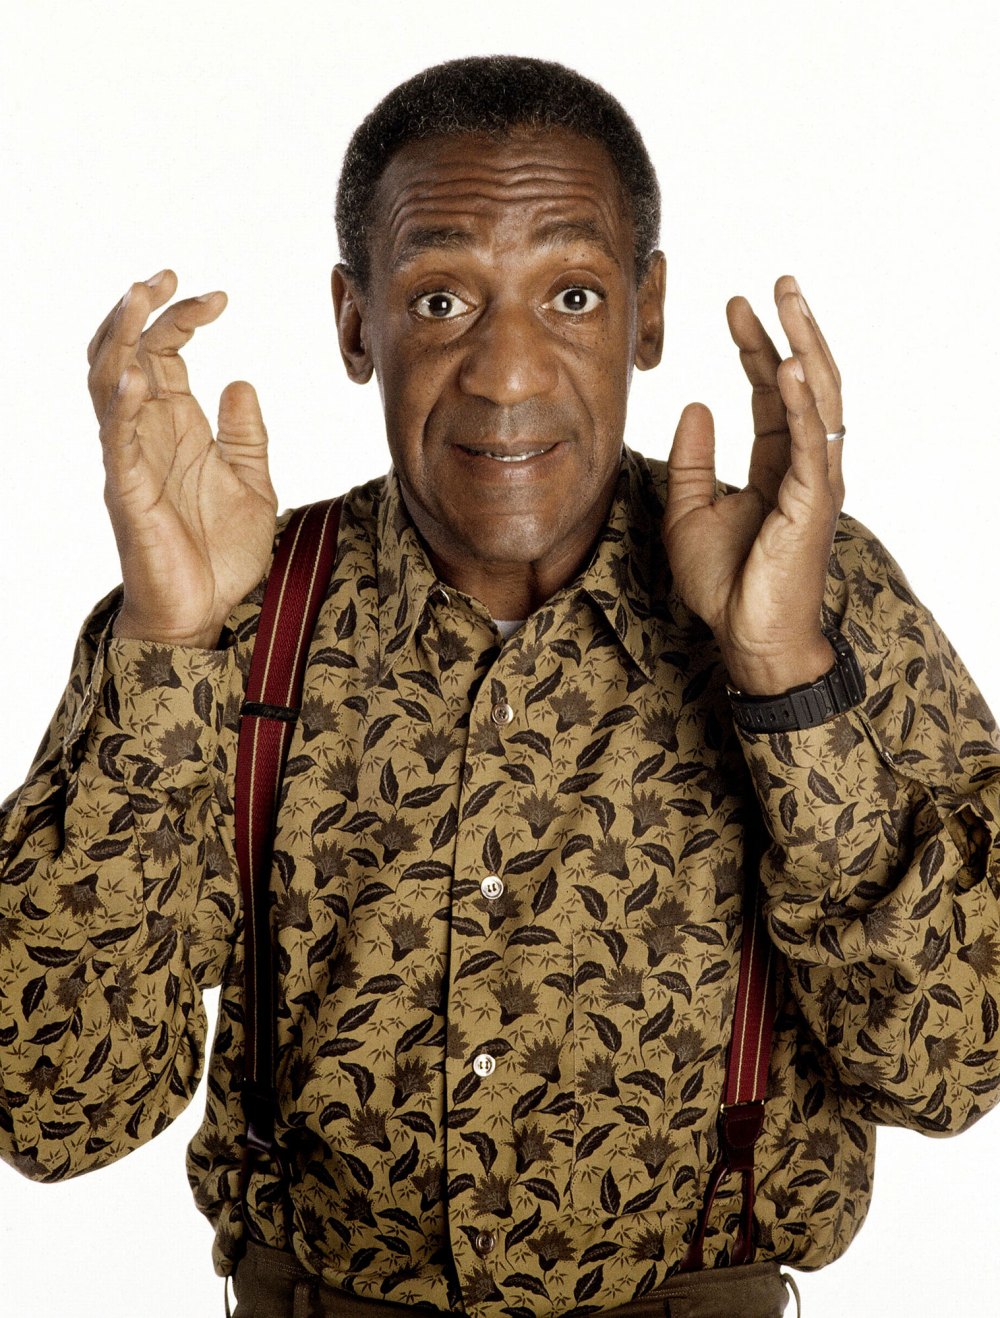 Bill Cosby Plummets From No. 3 Spot on List of Most Trusted Celebrities